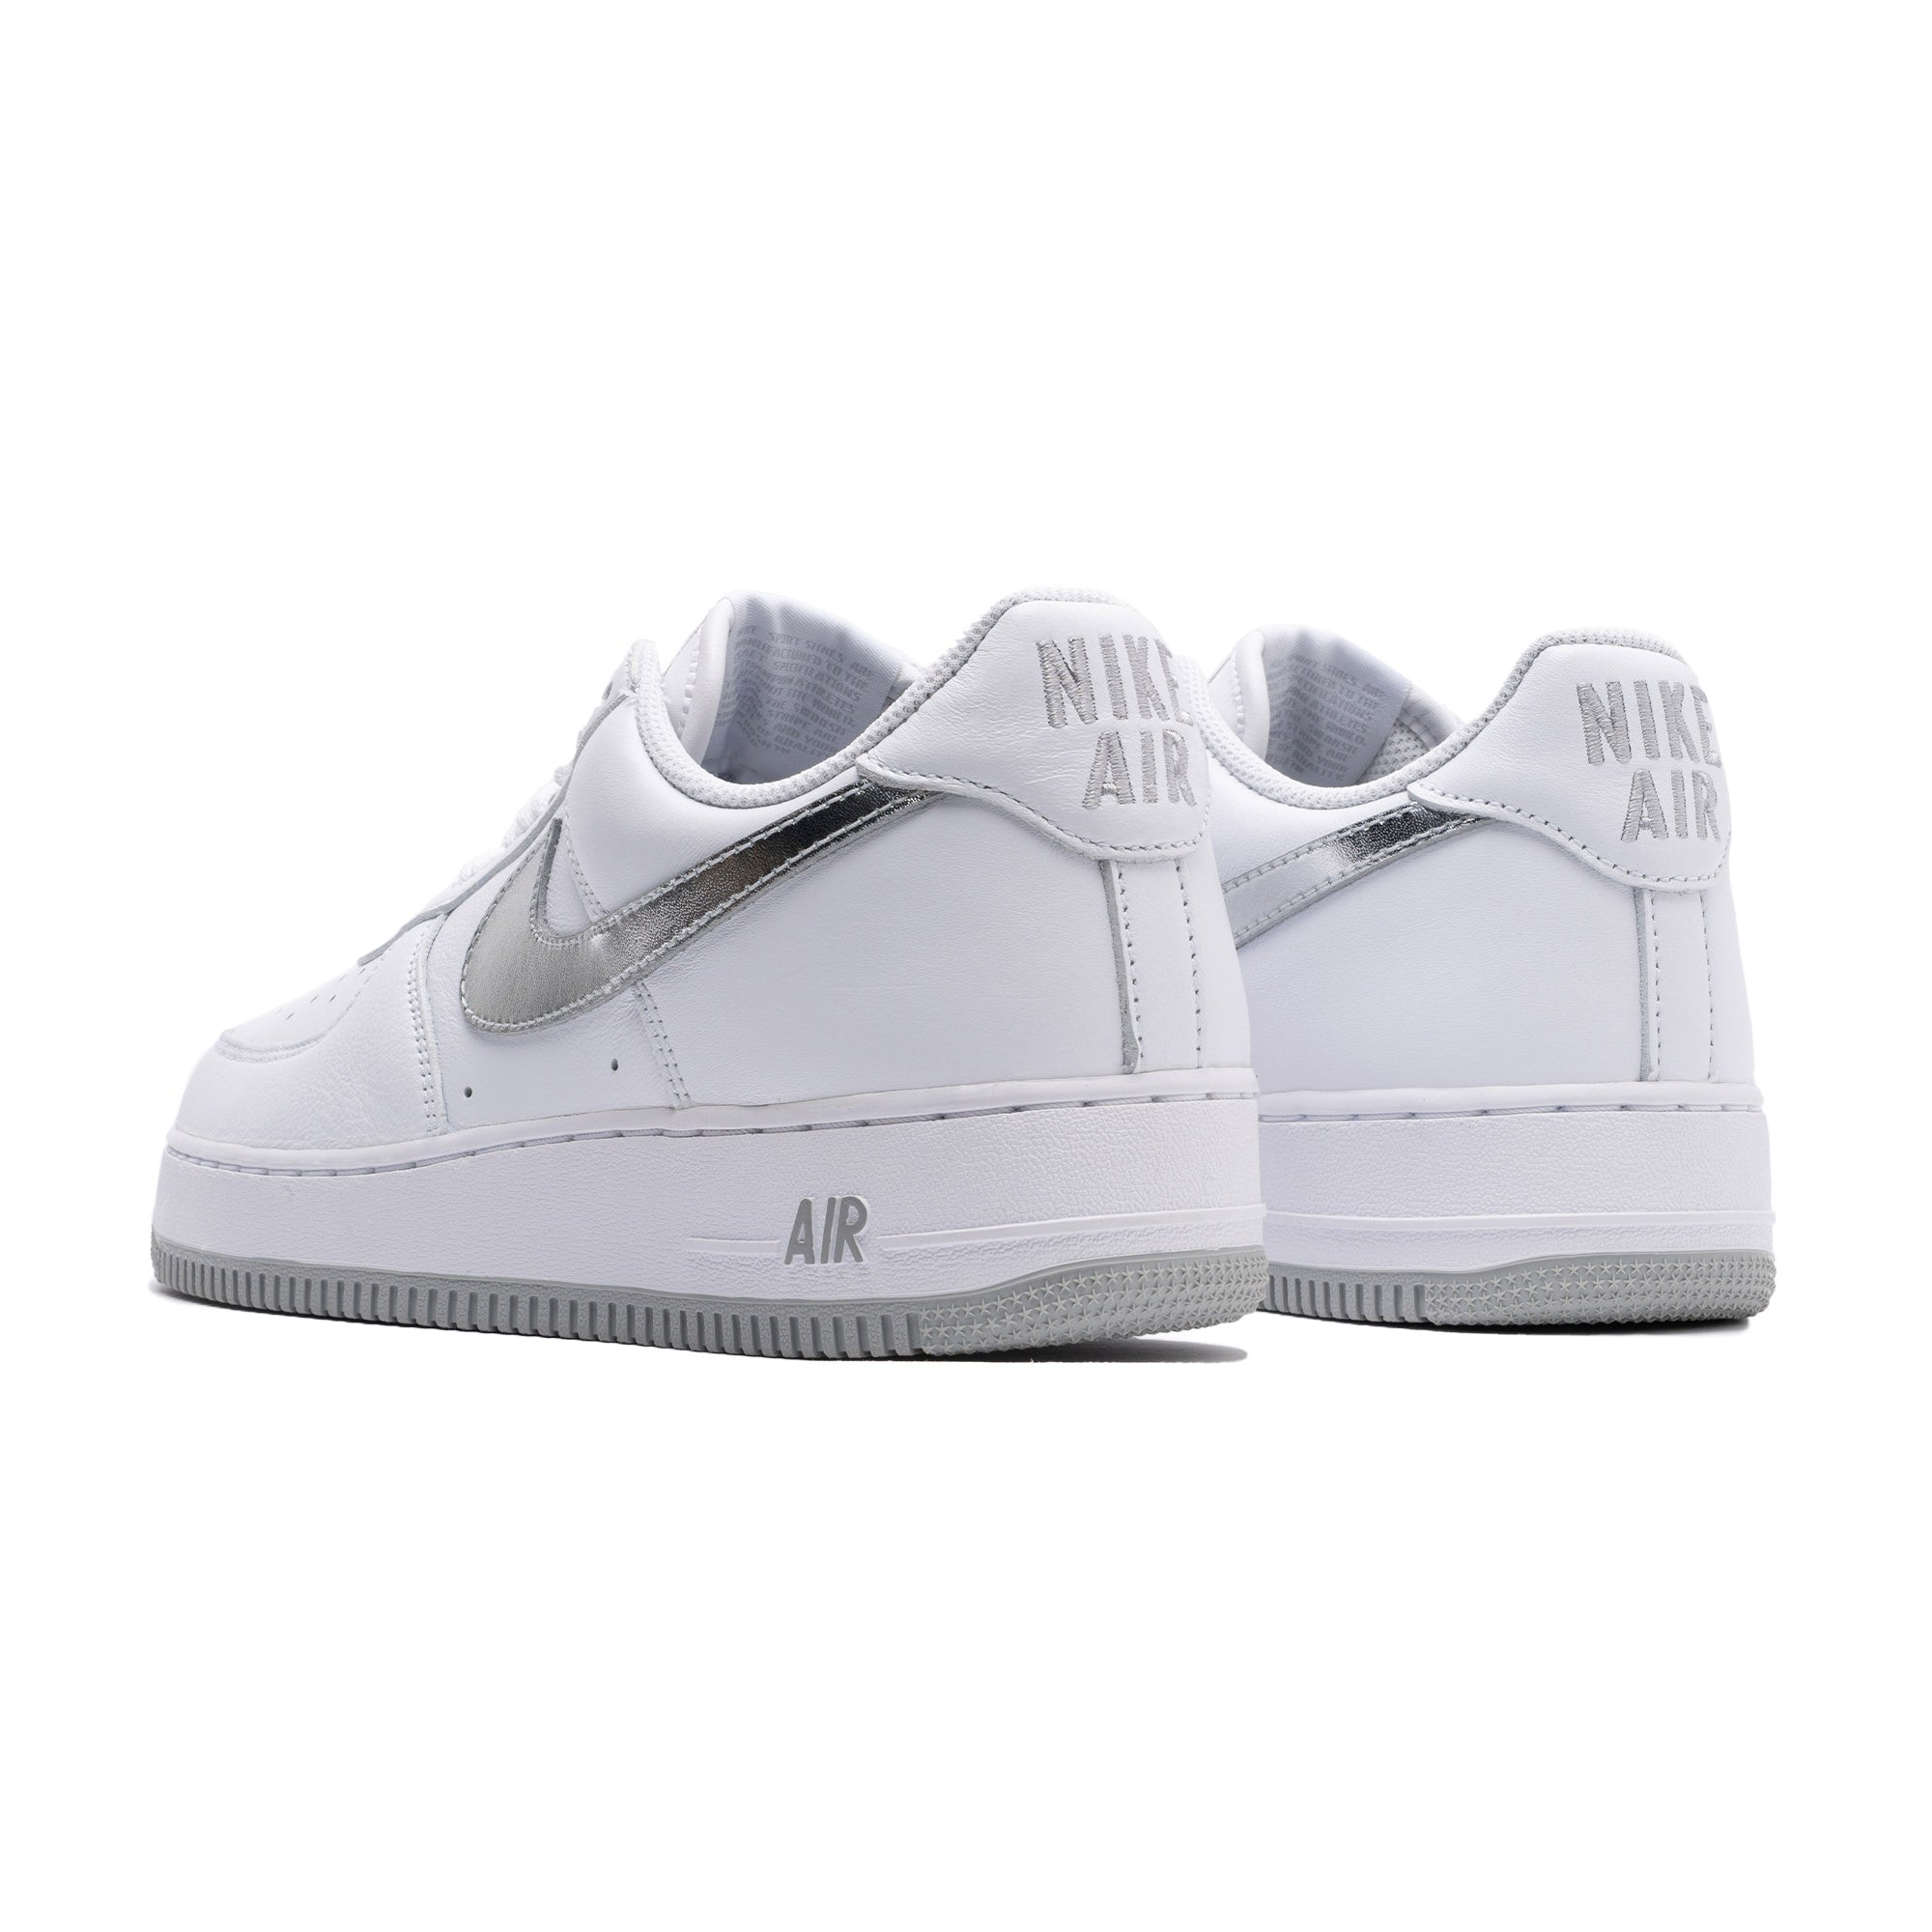 Air Force 1 Low Retro DZ6755-100 Silver